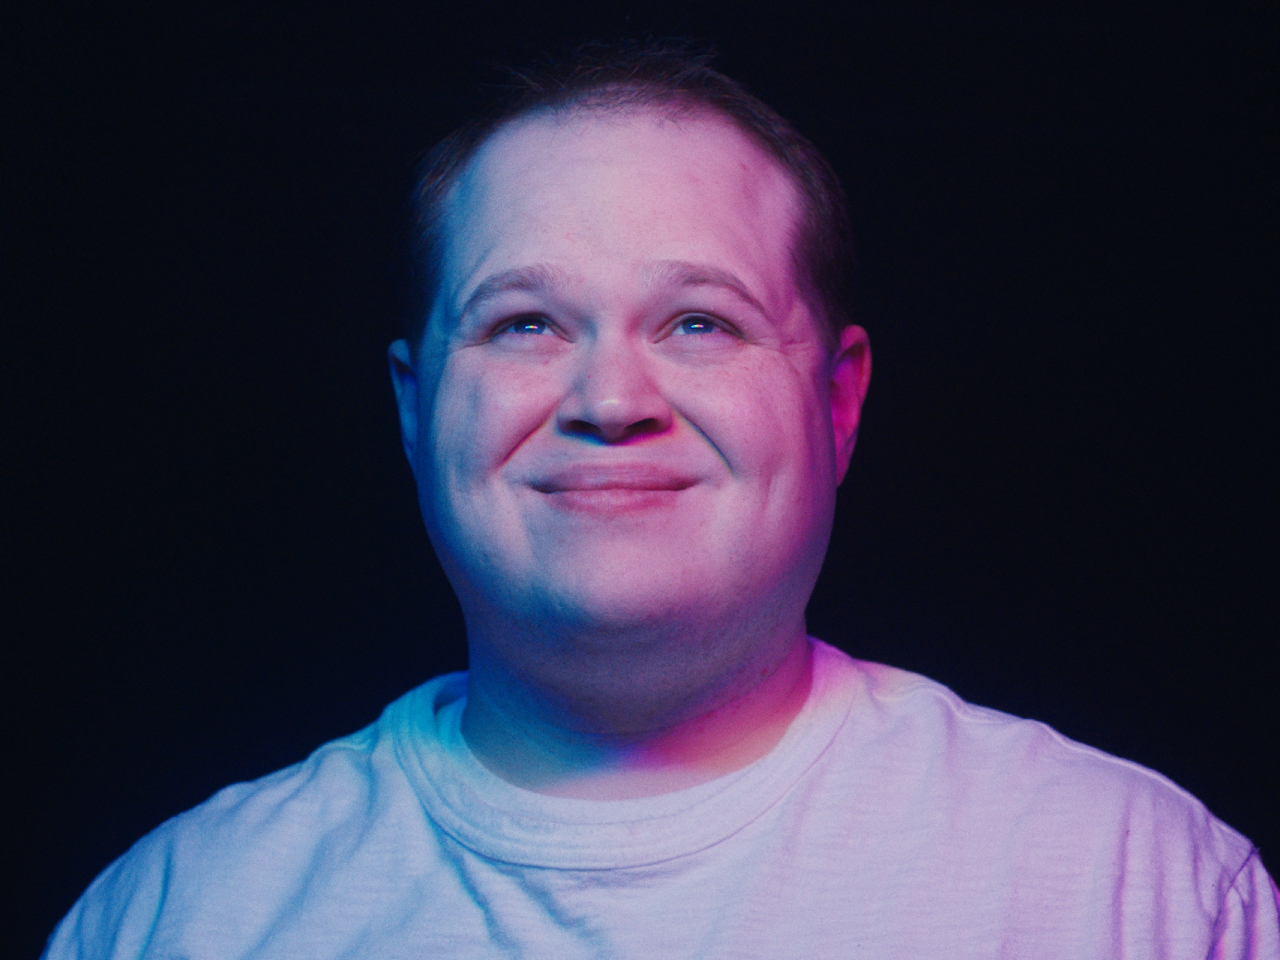 Film still from You Have No Idea depicting a man smiling with a blue and purple light shining on his face.